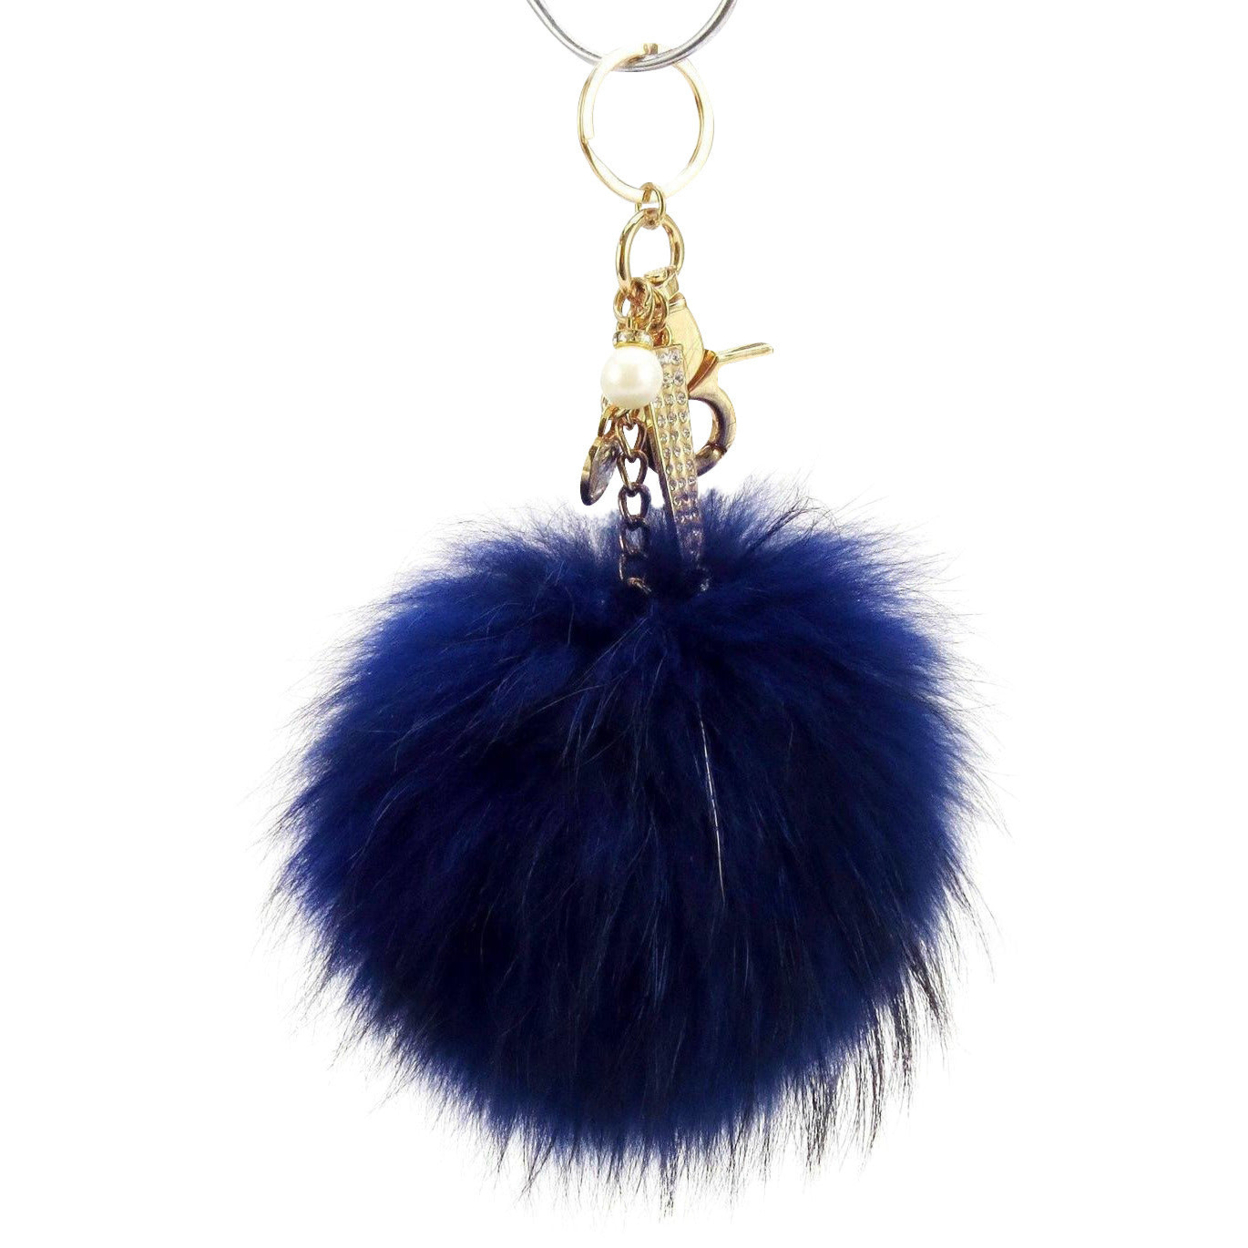 Real Fur Puff Ball Pom-Pom 6 Accessory Dangle Purse Charm - Royal Blue With Gold Hardware